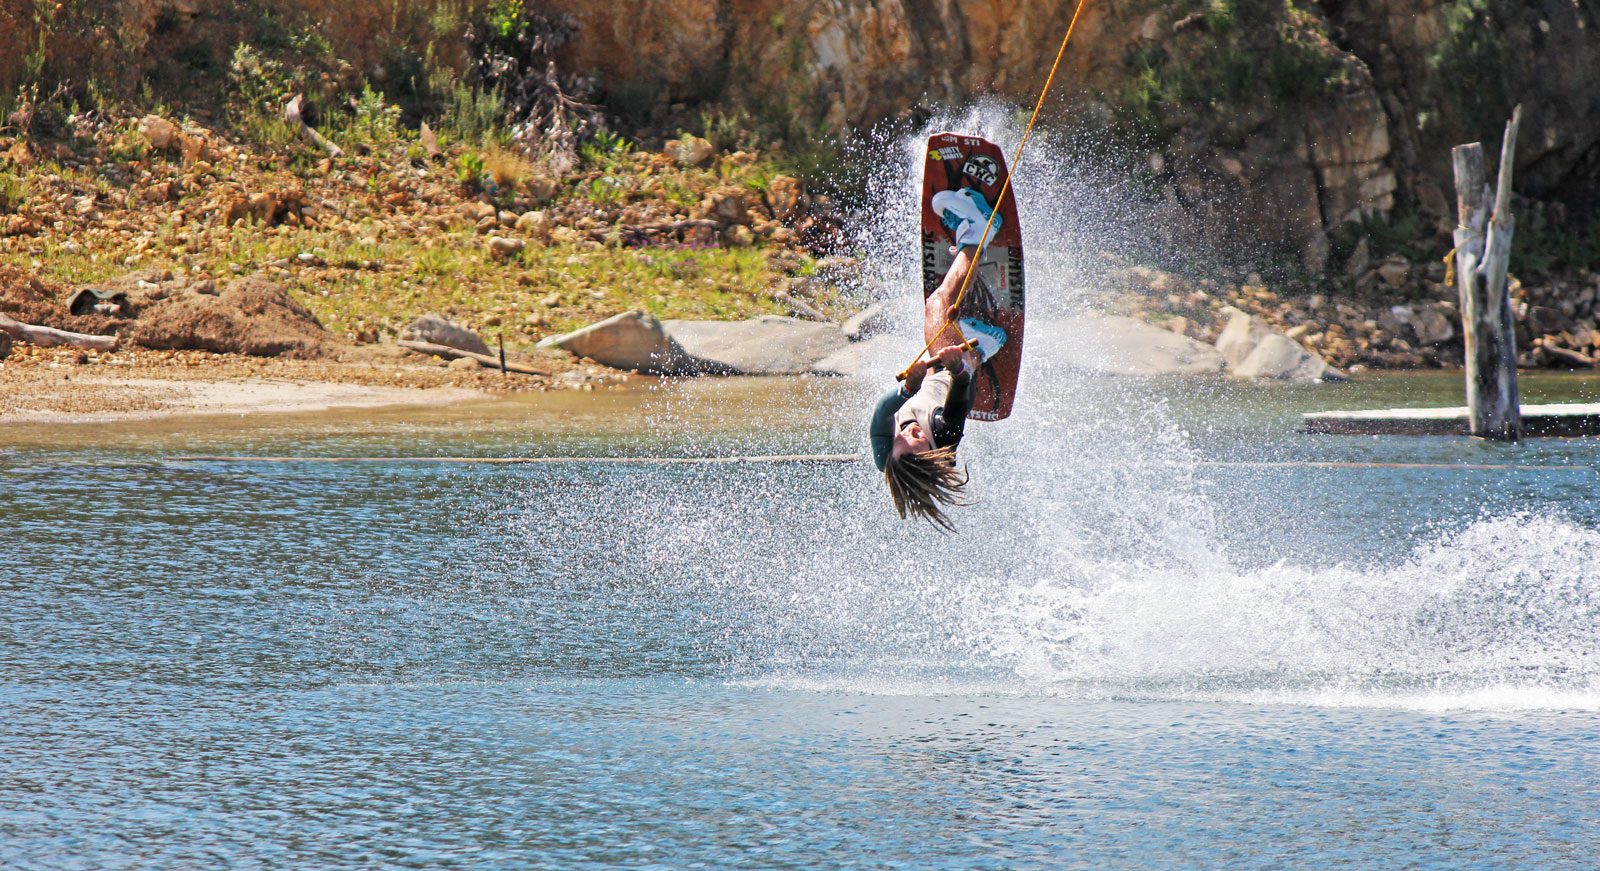 The Megan Nel Interview – South Africas Brightest Young Wakeboarding Talent